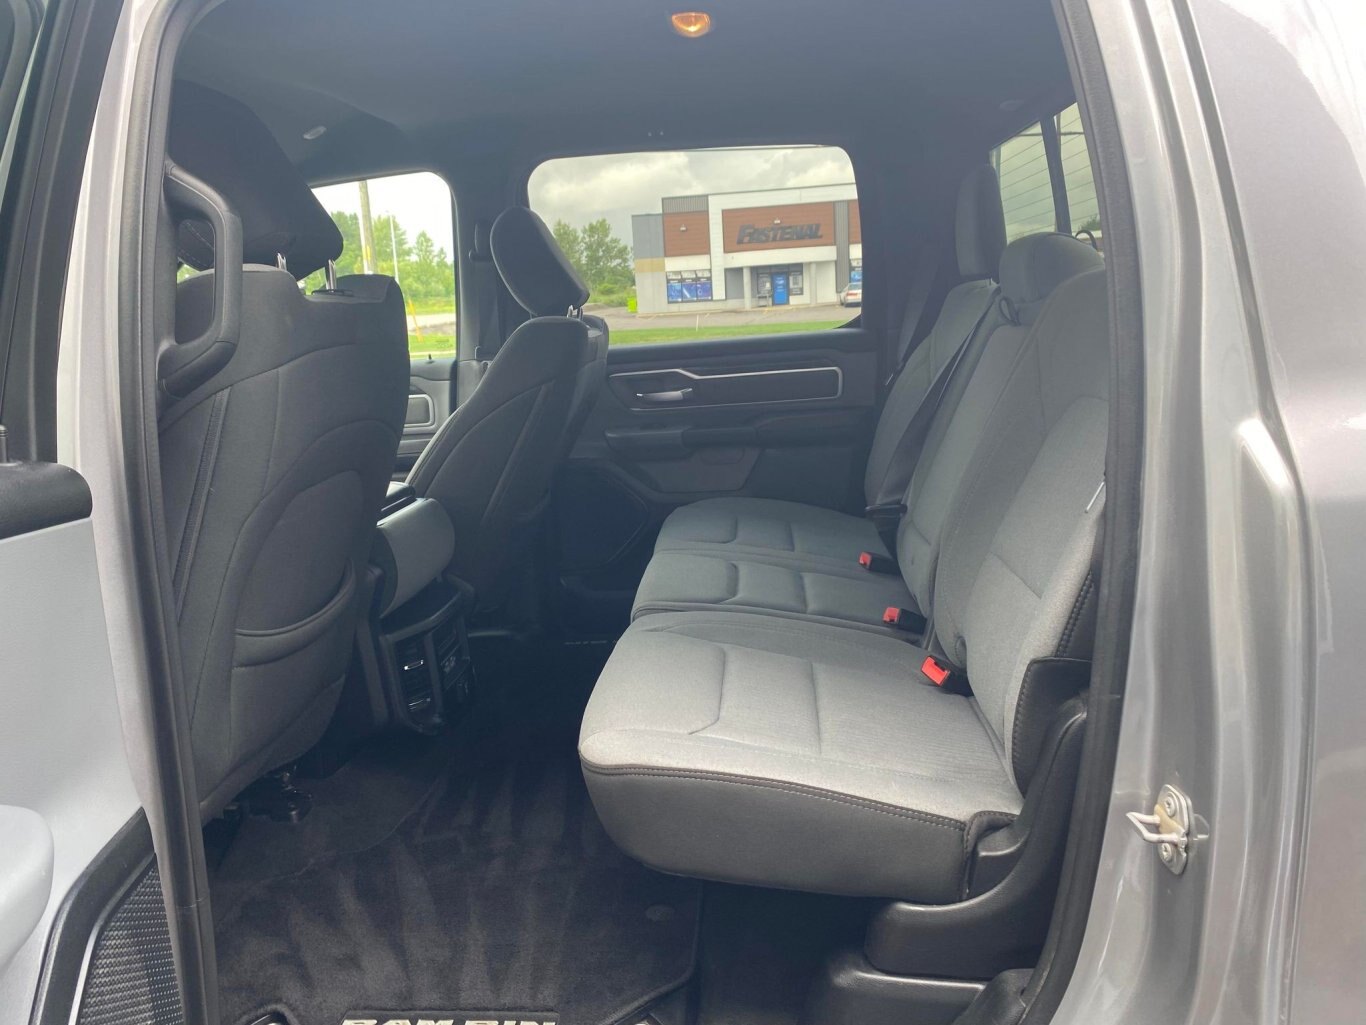 2021 DODGE RAM 1500 BIG HORN 4X4 CREW CAB WITH HEATED SEATS, HEATED STEERING WHEEL AND REAR VIEW CAMERA!! ( PREVIOUS RENTAL )